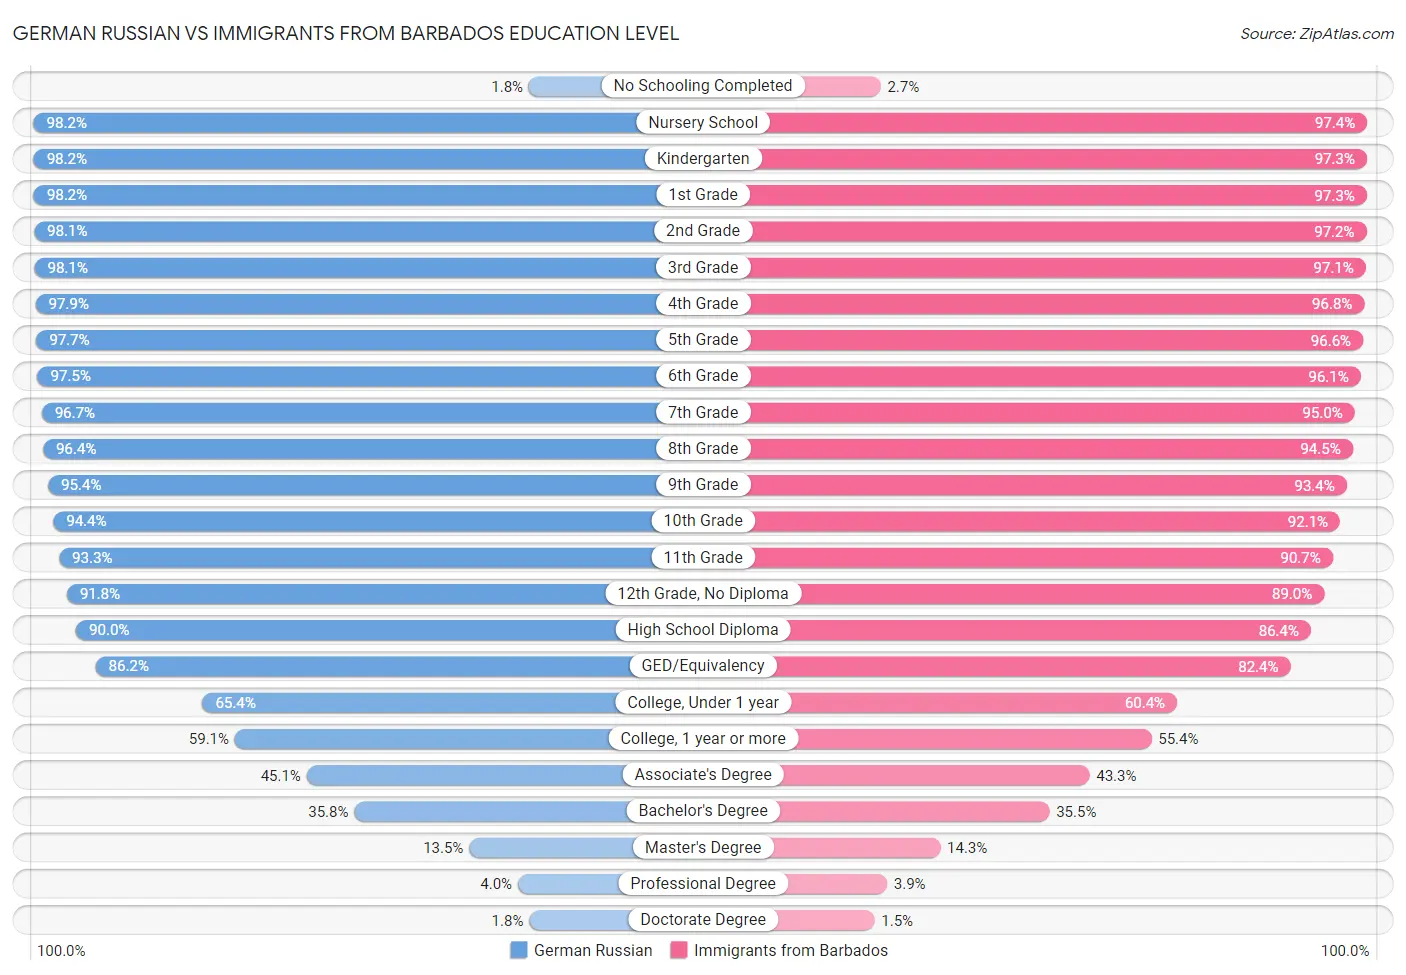 German Russian vs Immigrants from Barbados Education Level